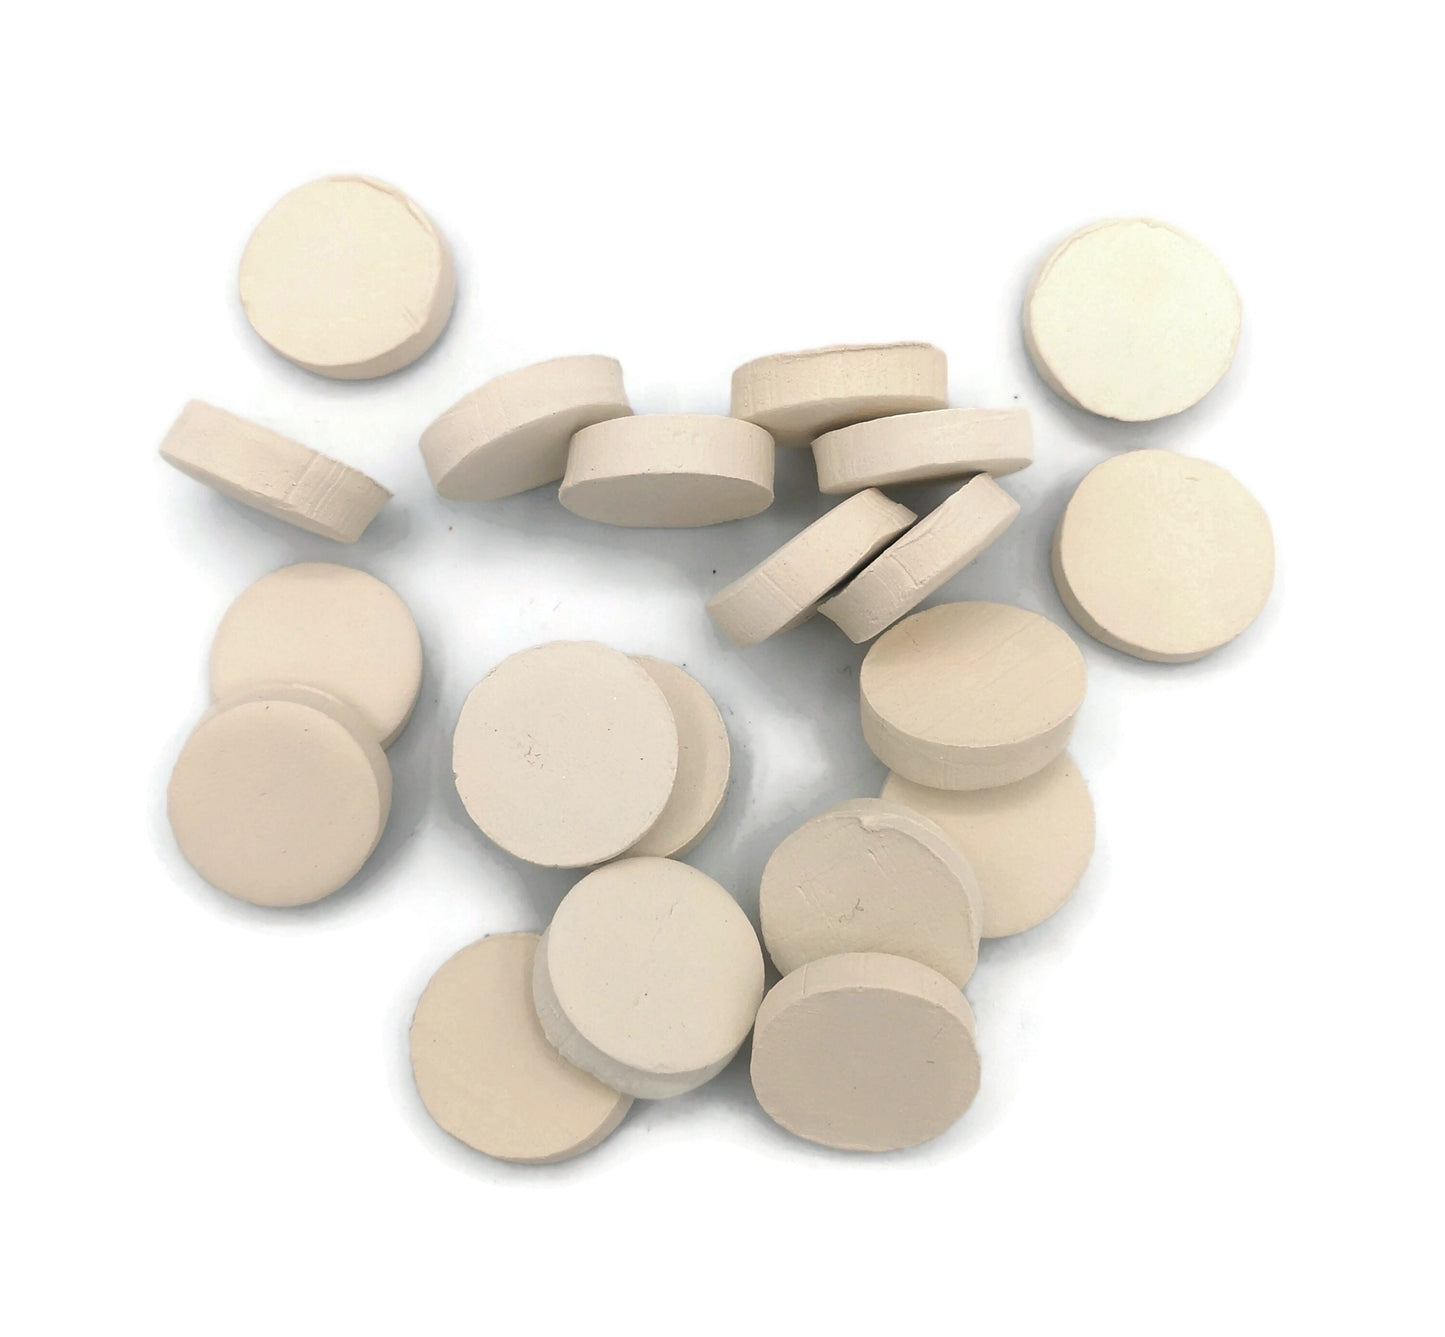 Small Ceramic Round Mosaic Tiles for Crafts, 20 Pcs Blank Tiles, Unpainted Ceramic Bisque Ready To Paint Tiny Tiles - Ceramica Ana Rafael